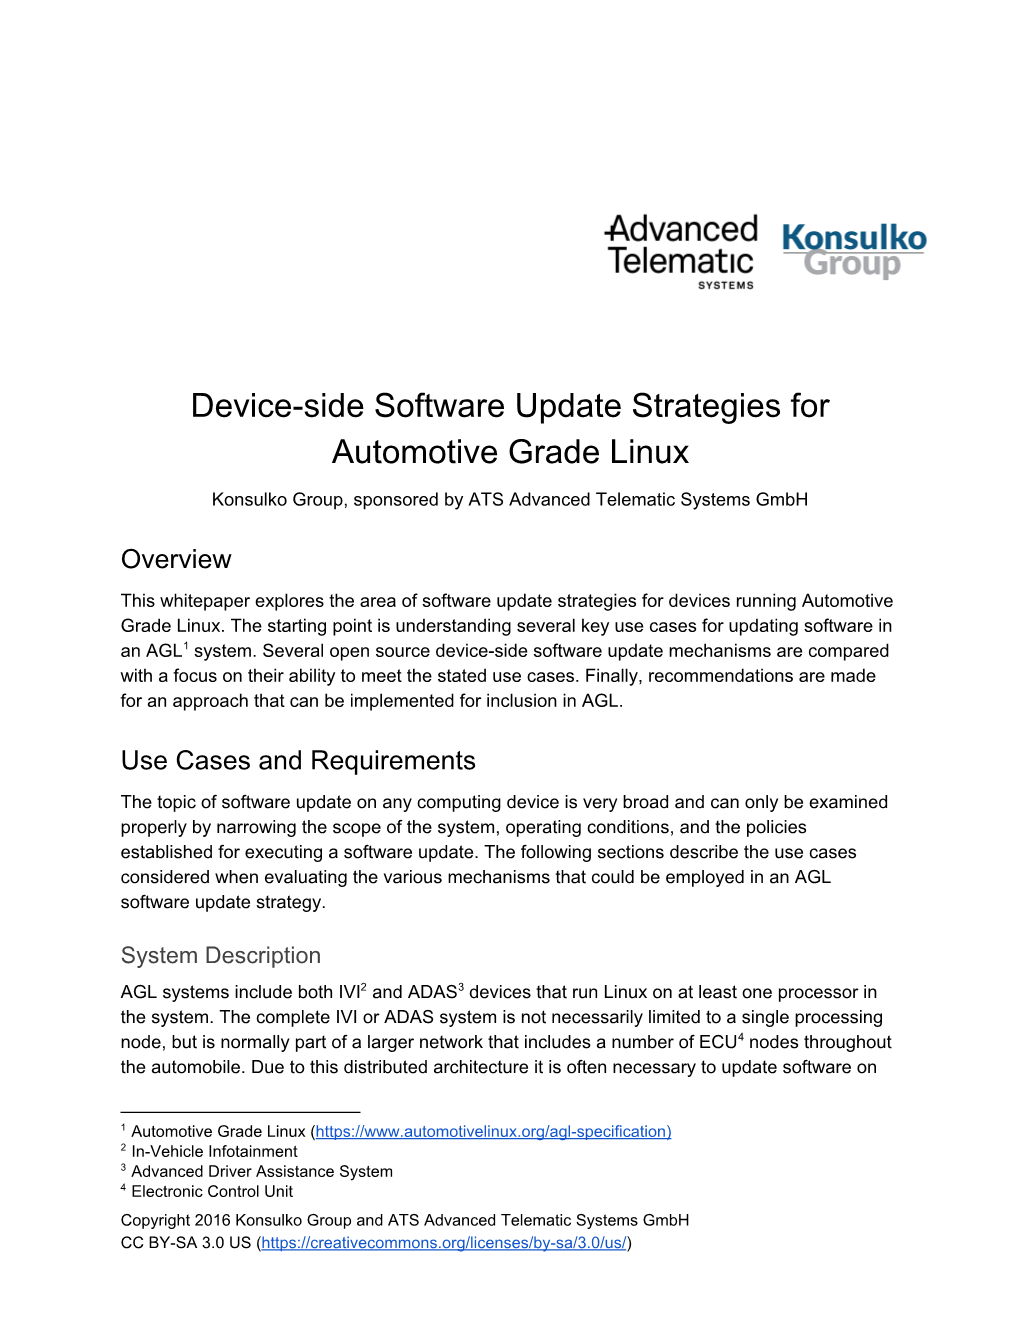 Deviceside Software Update Strategies for Automotive Grade Linux